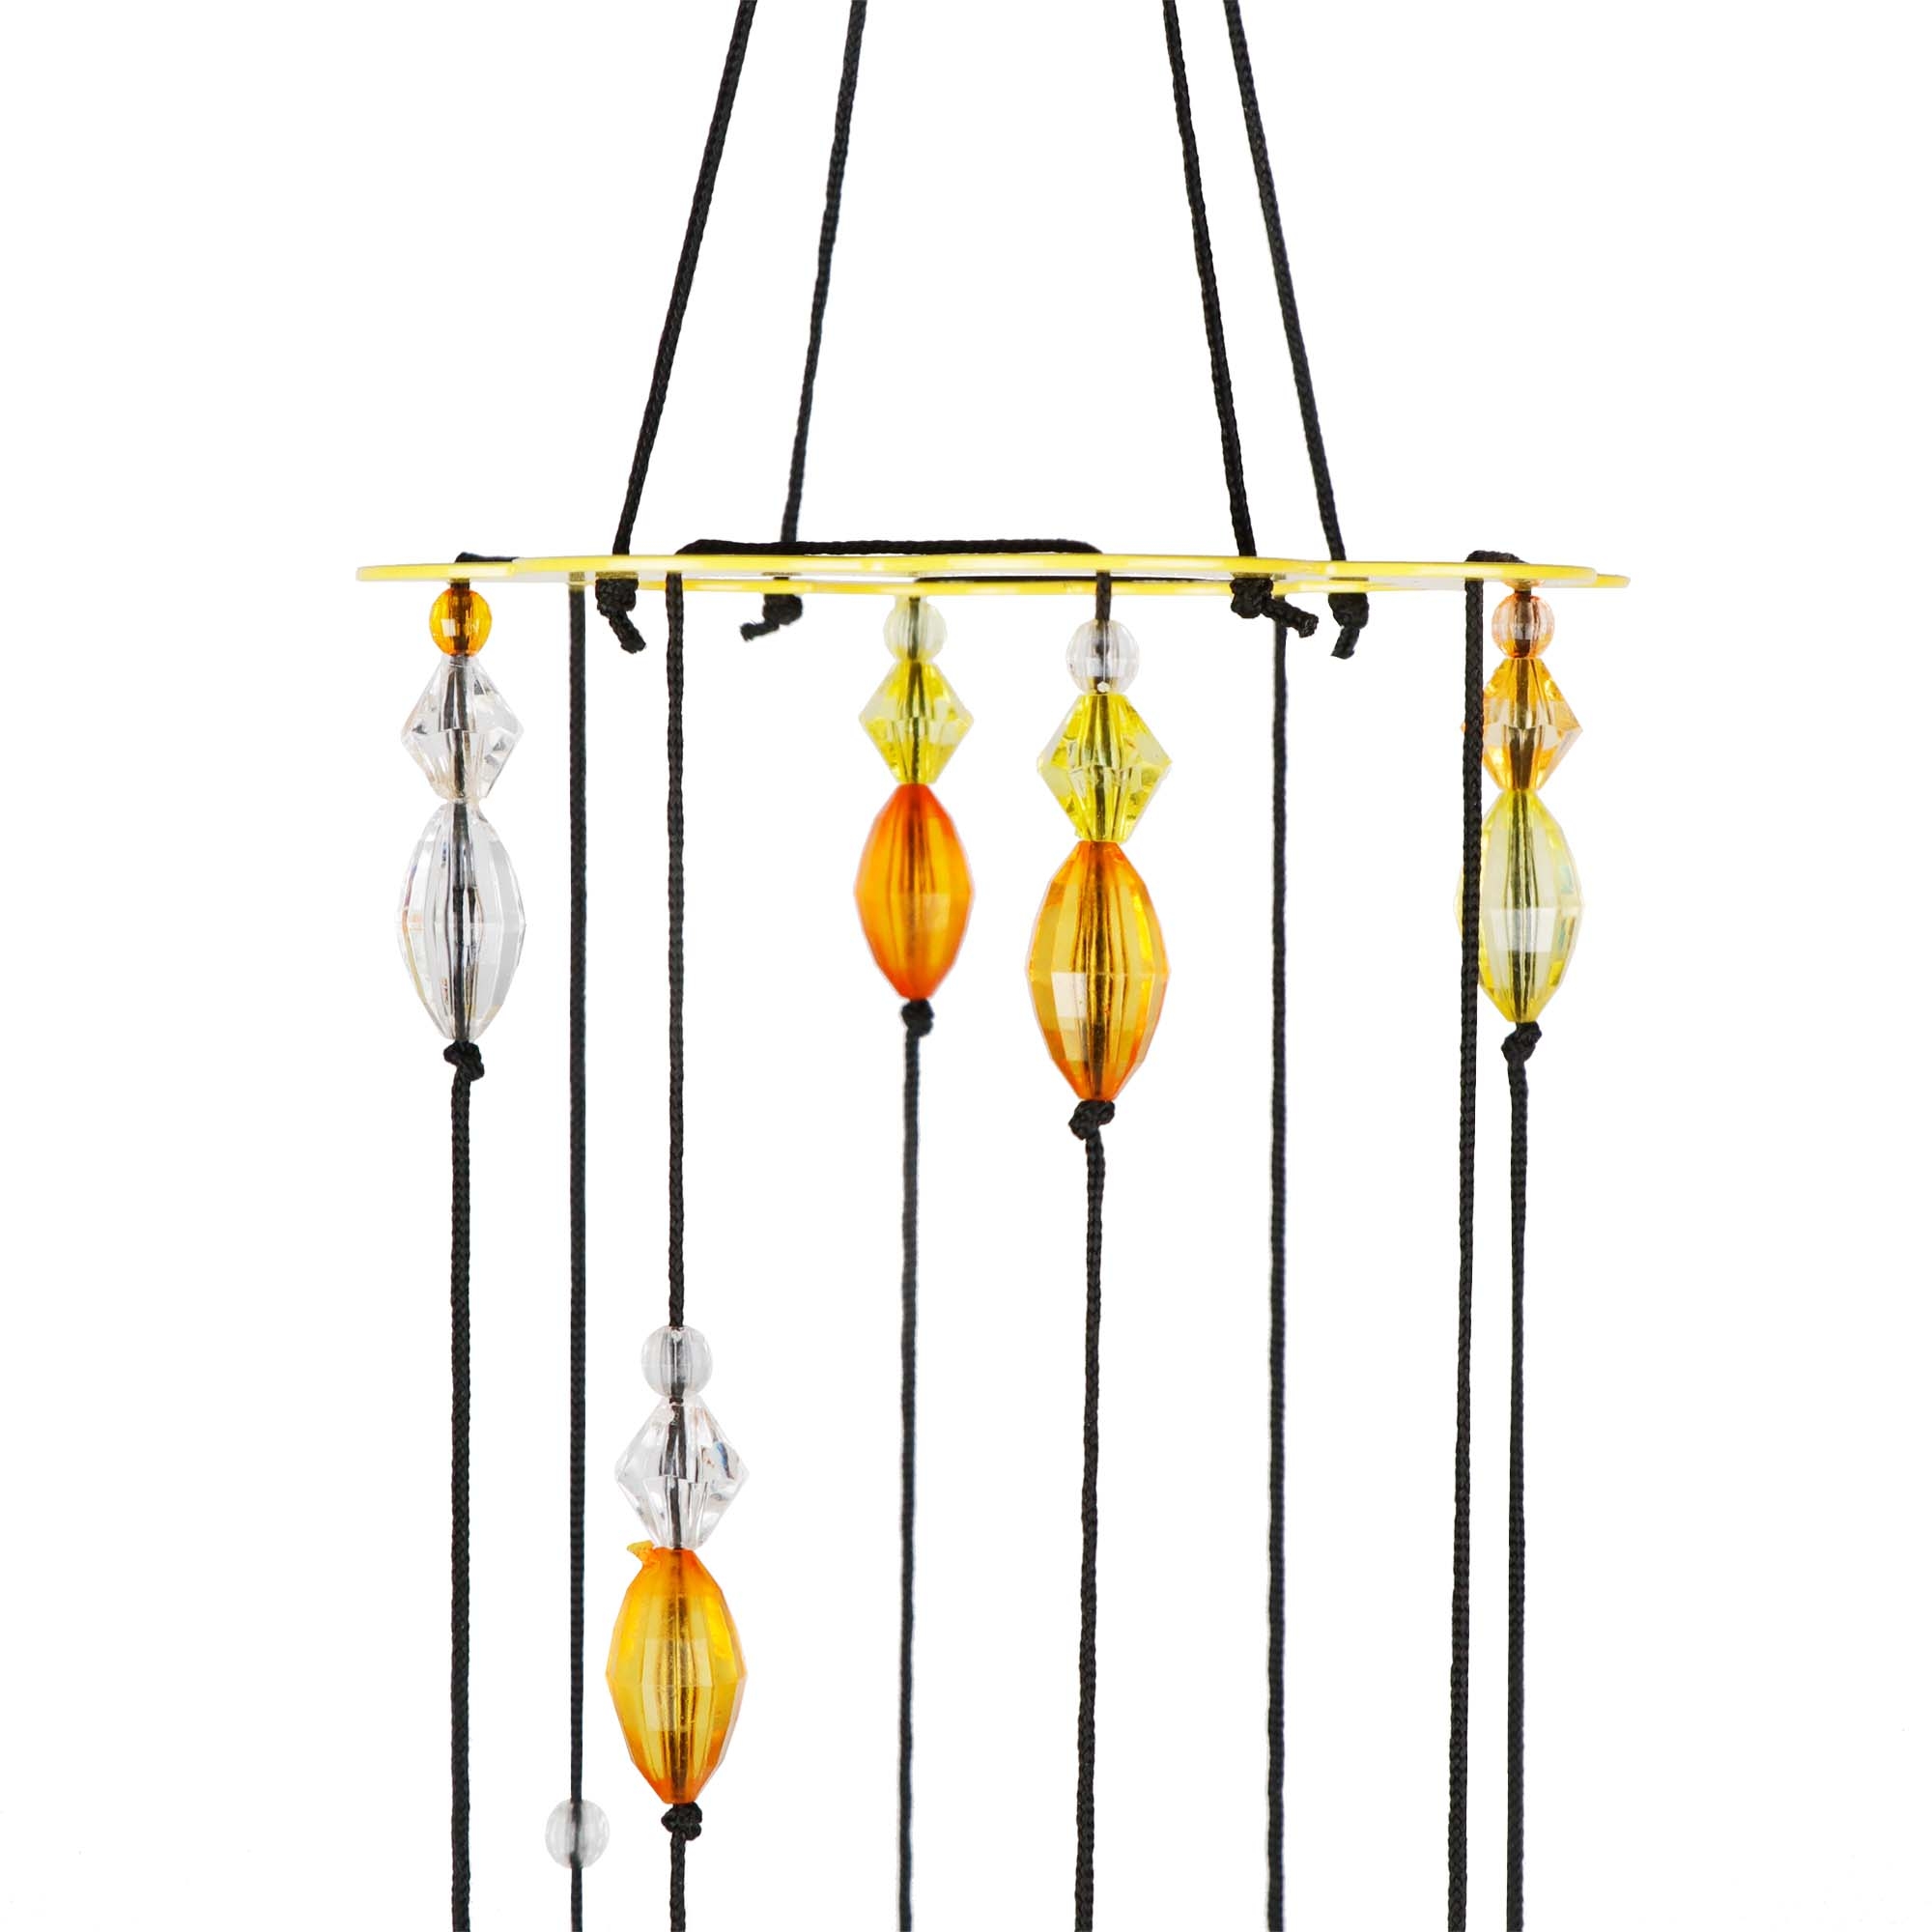 Archies | Archies KEEPSAKE Metal Wind Chimes with 4 Bells with Door wind chain Wall Hanger 55CM Multicolor 2